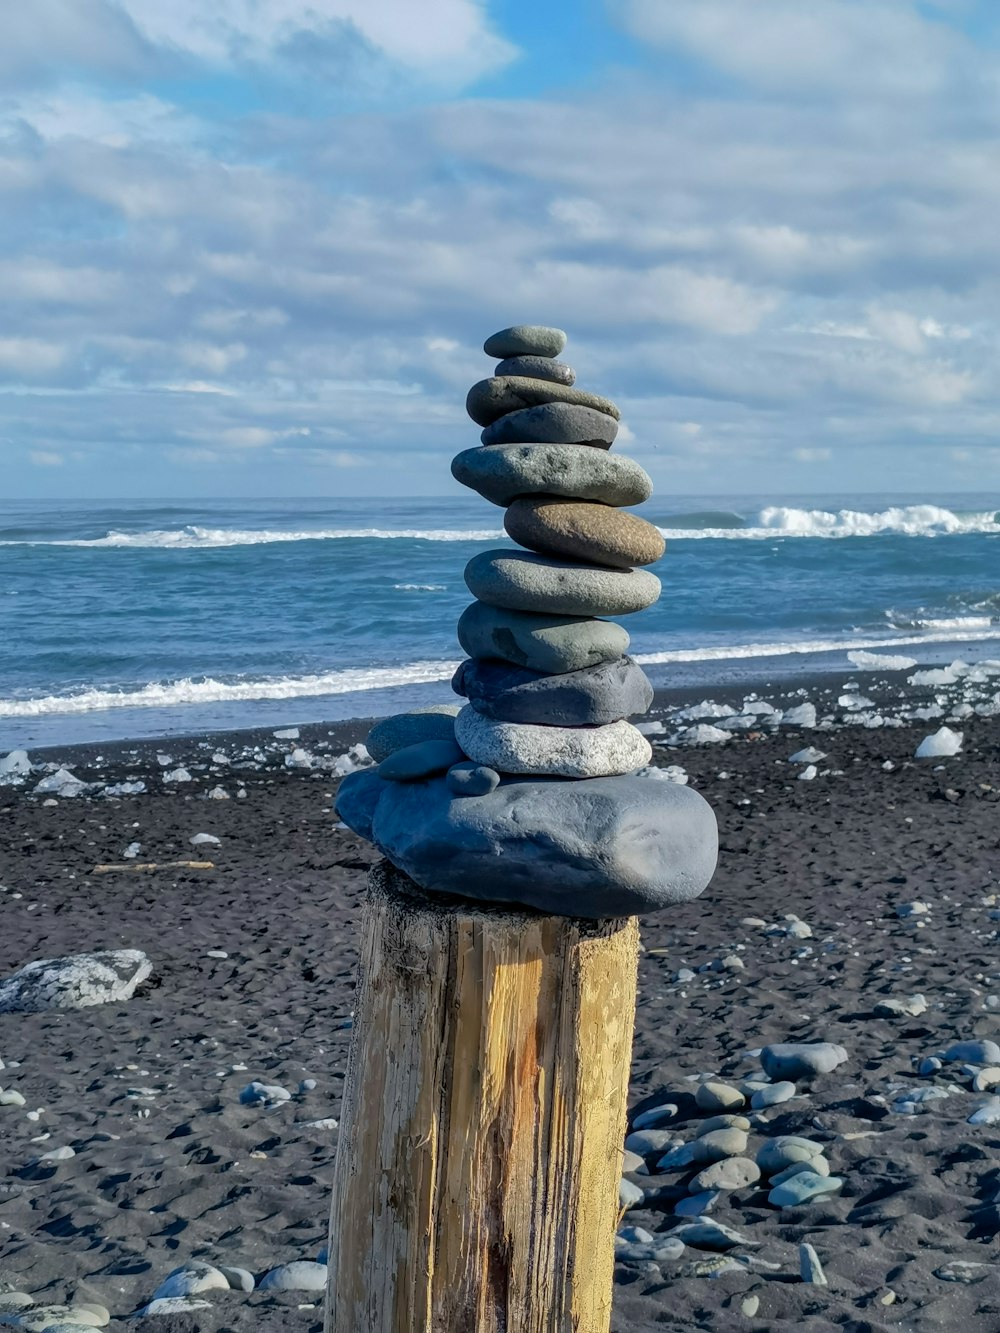 a pile of rocks sitting on top of a wooden post